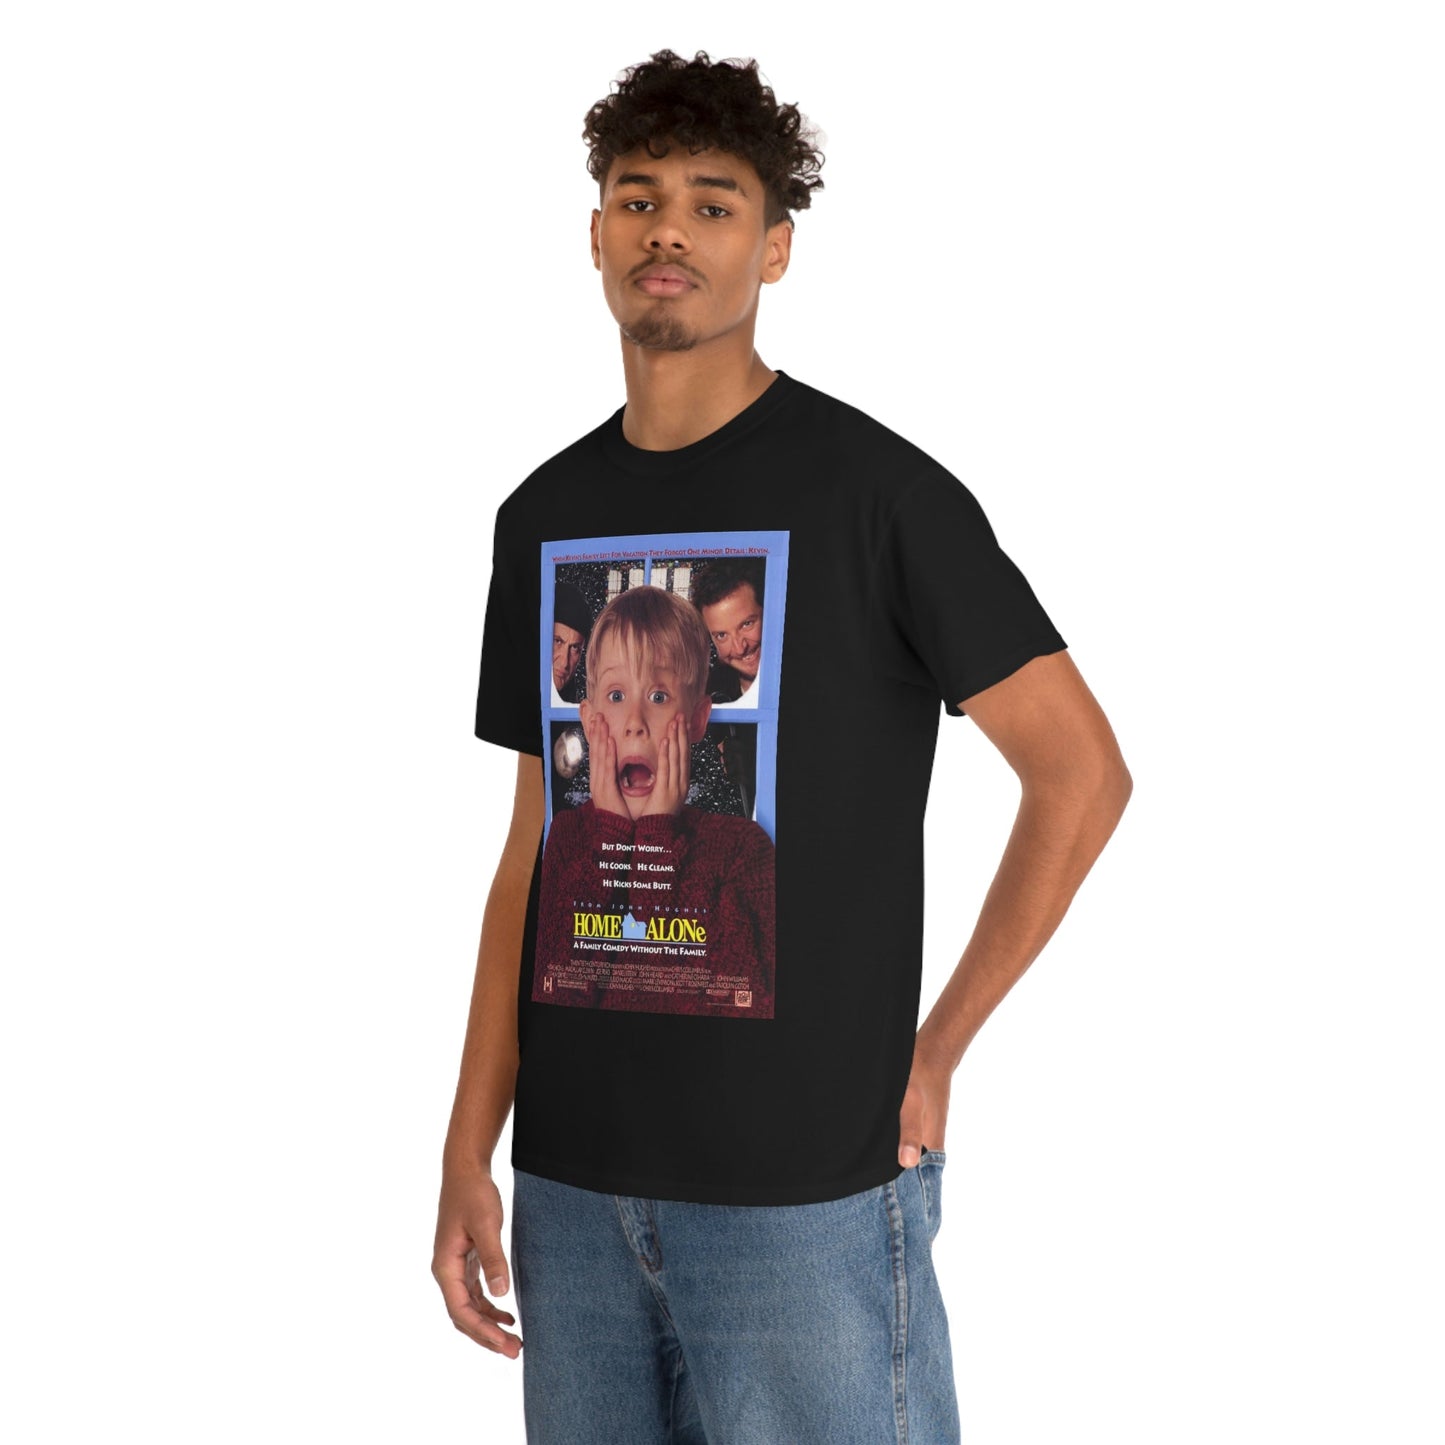 Home Alone Movie Poster T-Shirt - RetroTeeShop